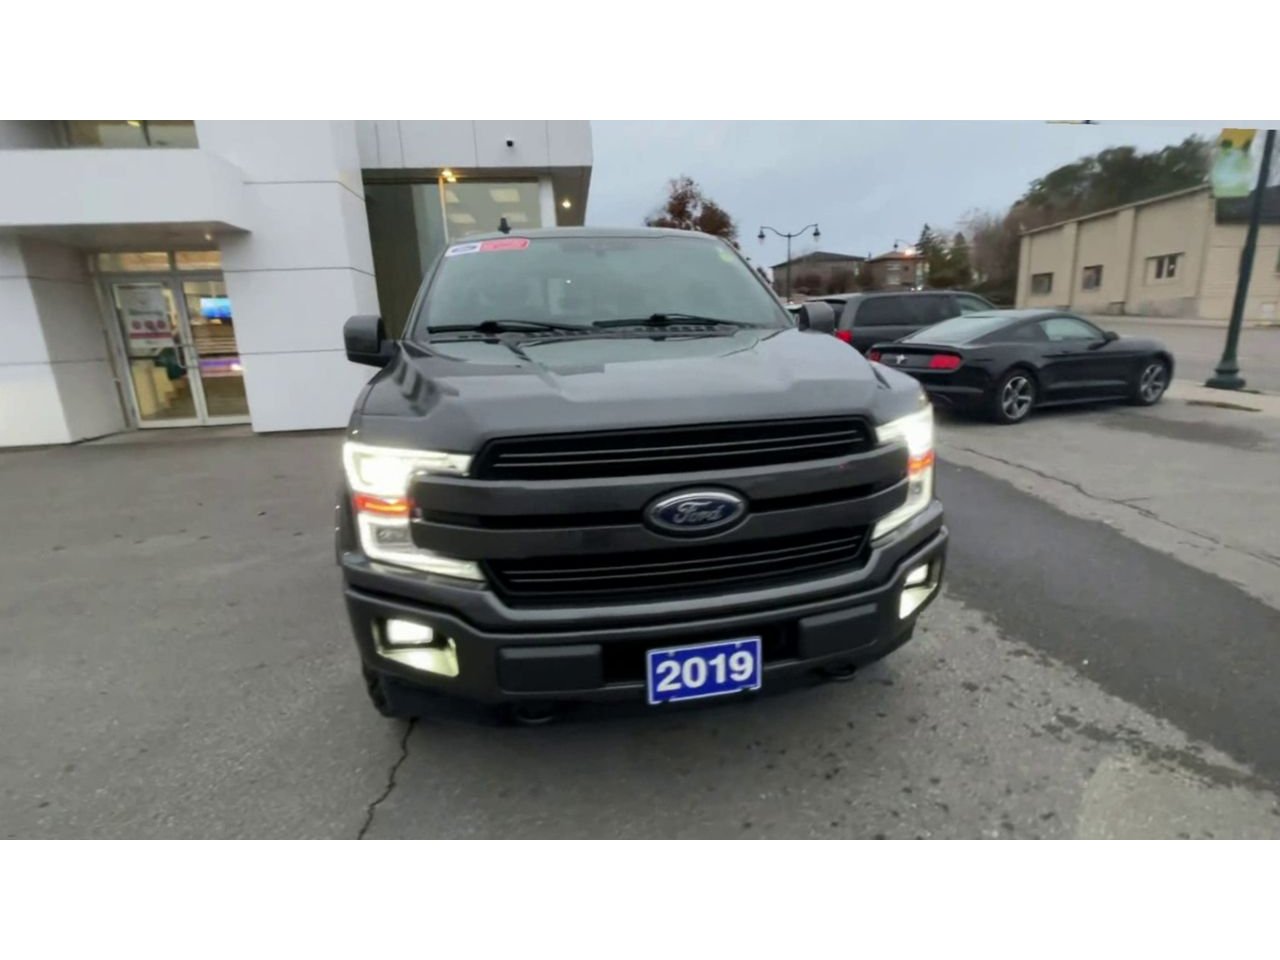 2019 Ford F-150 - 21440A Full Image 3